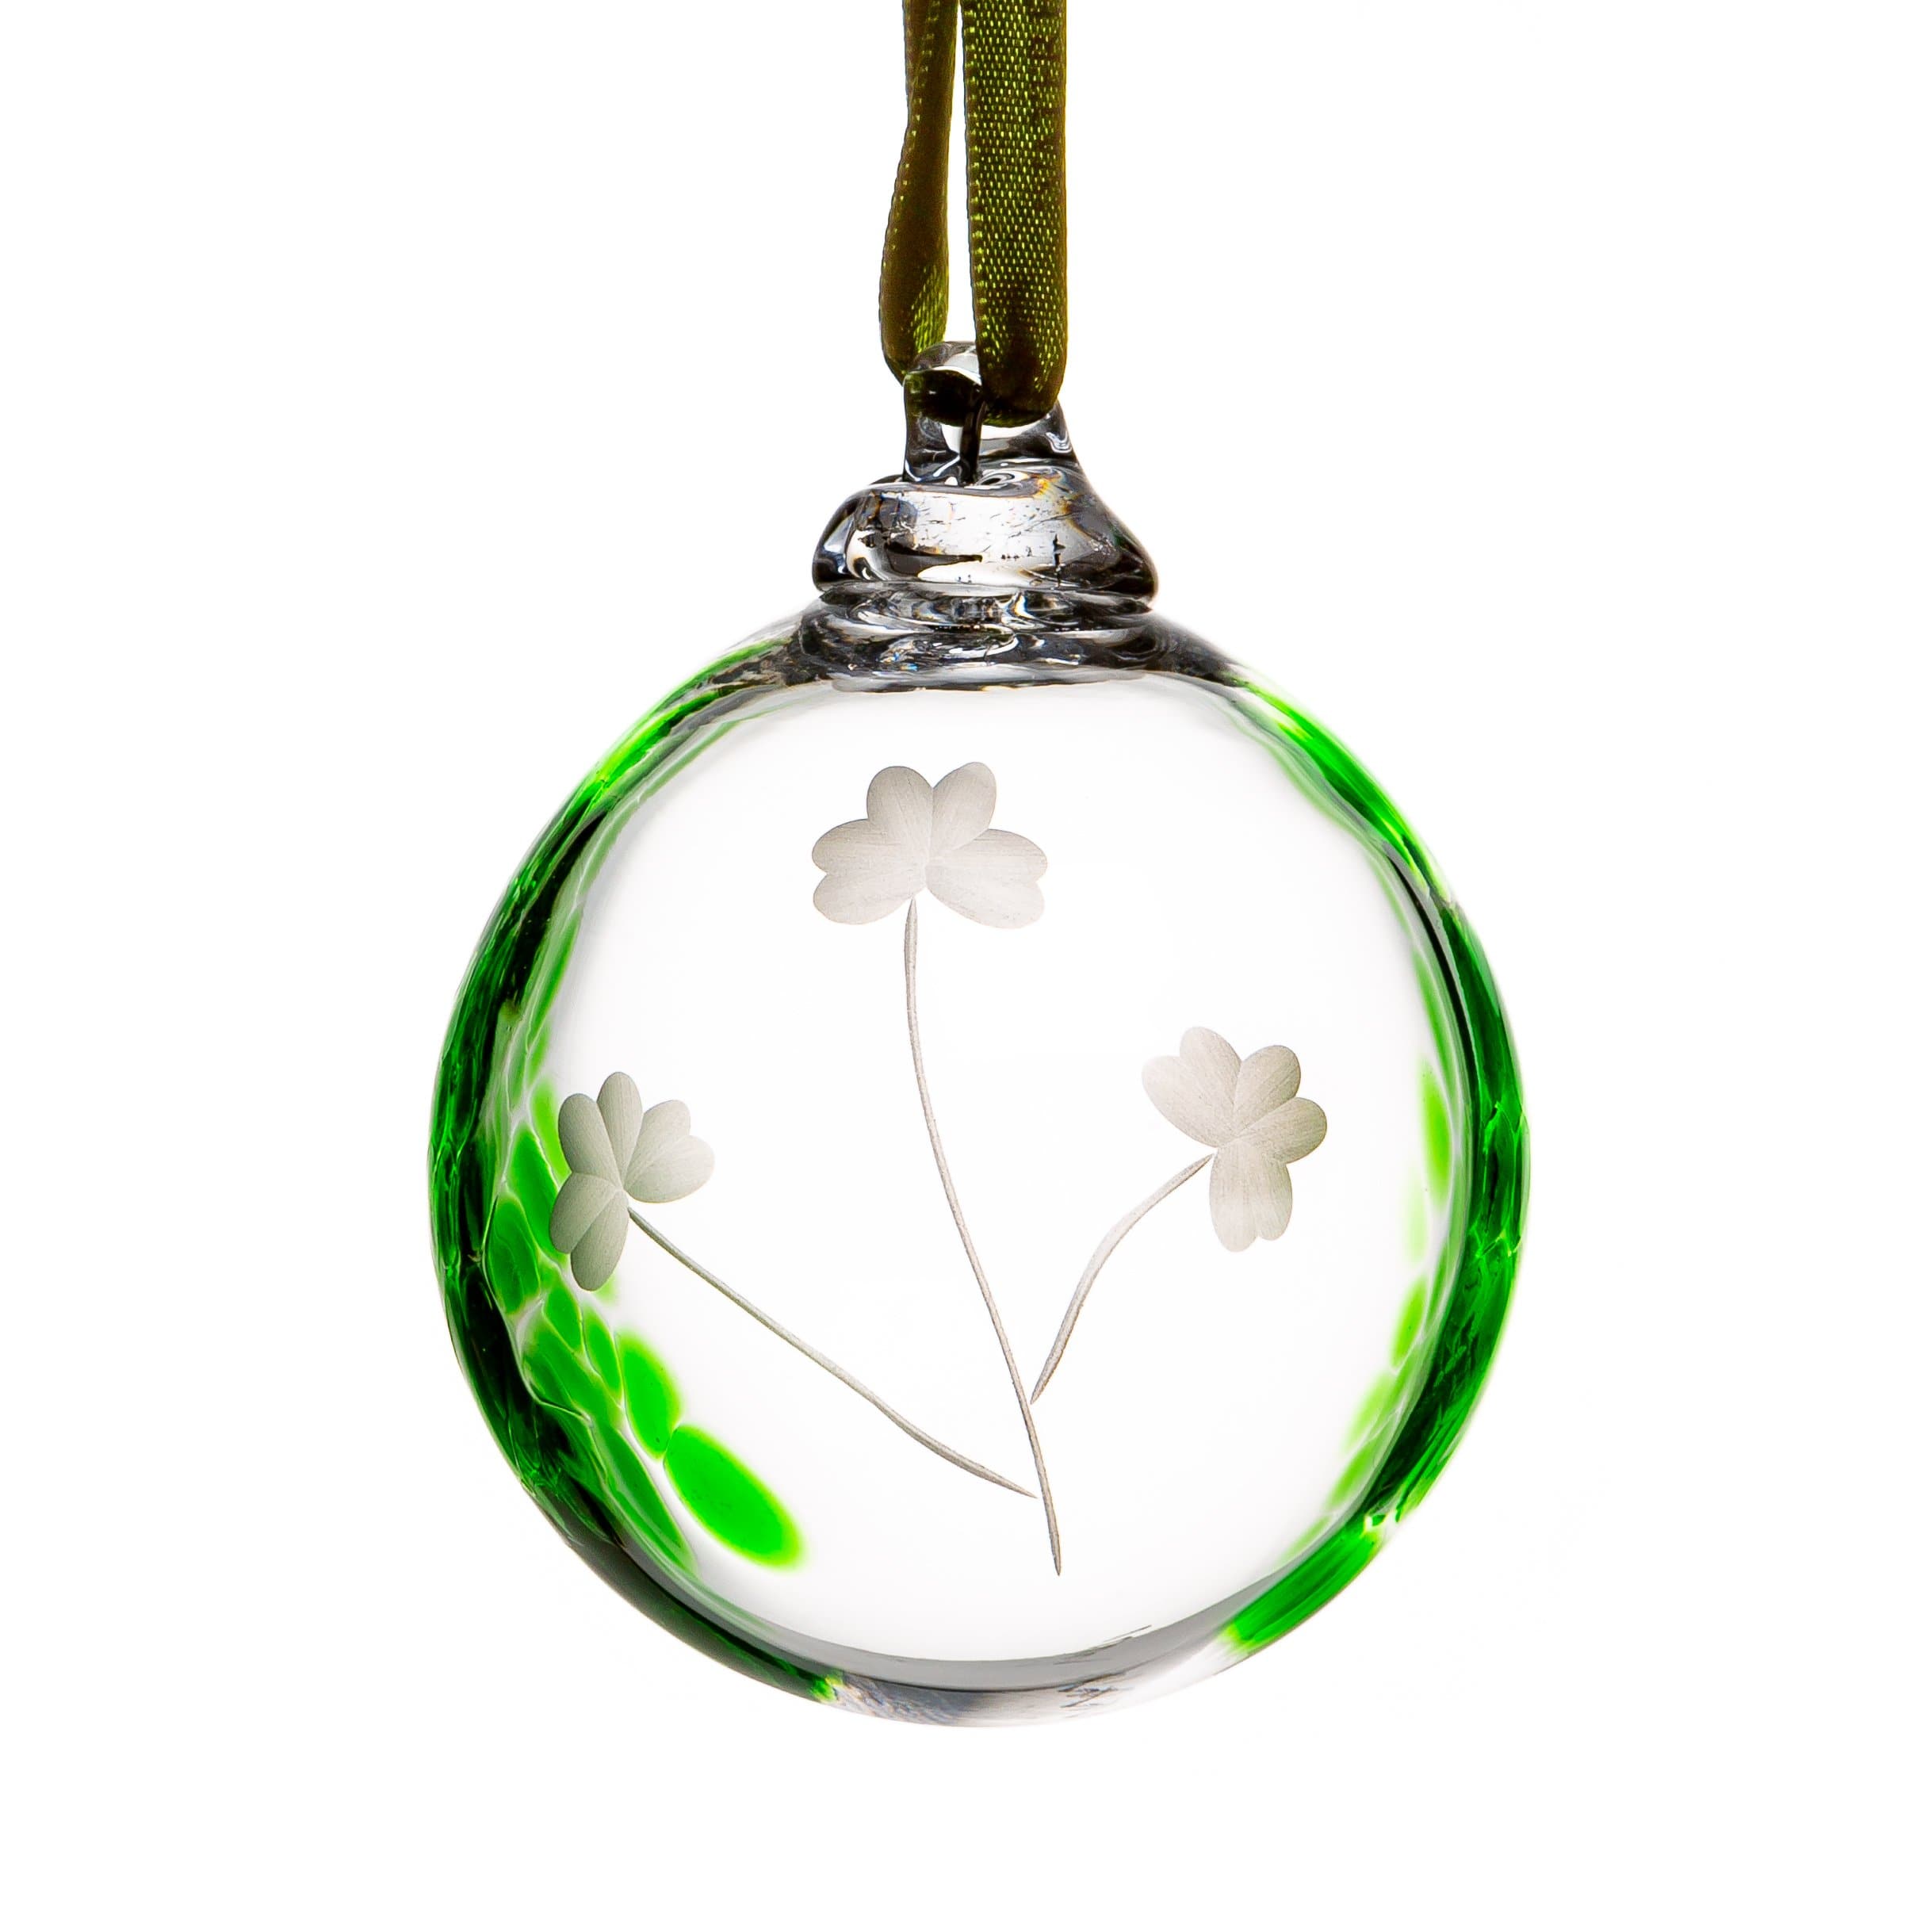 Handmade Irish Shamrock Ornament Unique Glass Bauble Hand Blown Ideal Gift Handcrafted in Co. Waterford Ireland by Our Maker-Partner in Co. Waterford